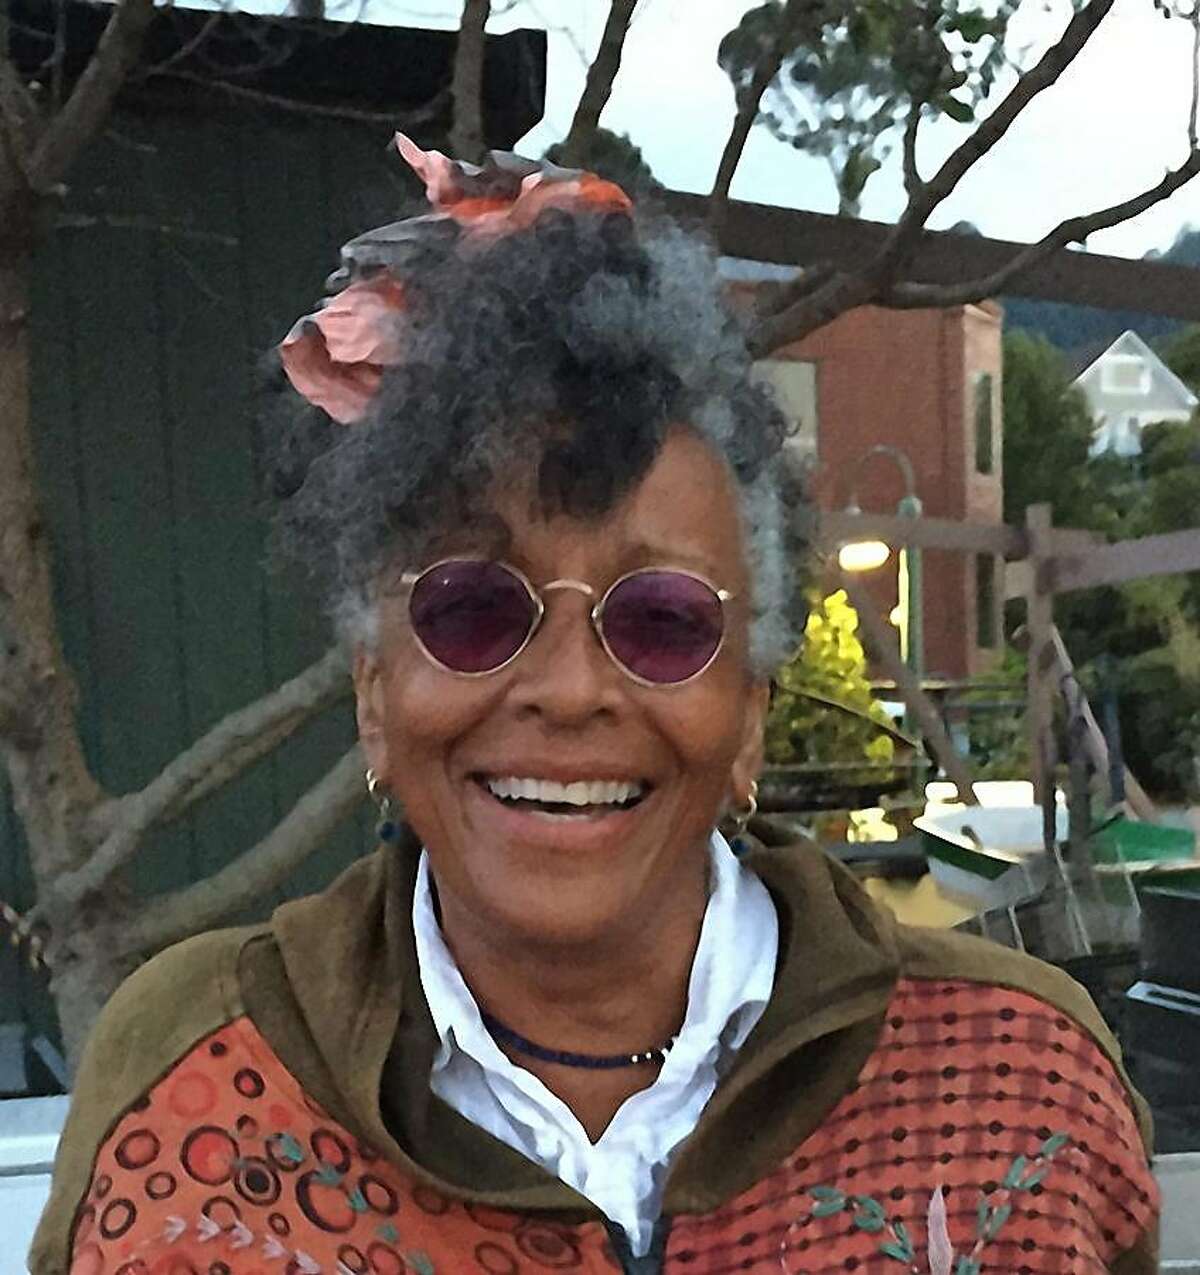 Steefanie Wicks, of Sausalito, is pictured in a handout family photo. Wicks' body was discovered aboard her houseboat in Galilee Harbor on March 19, 2019. She was 71.